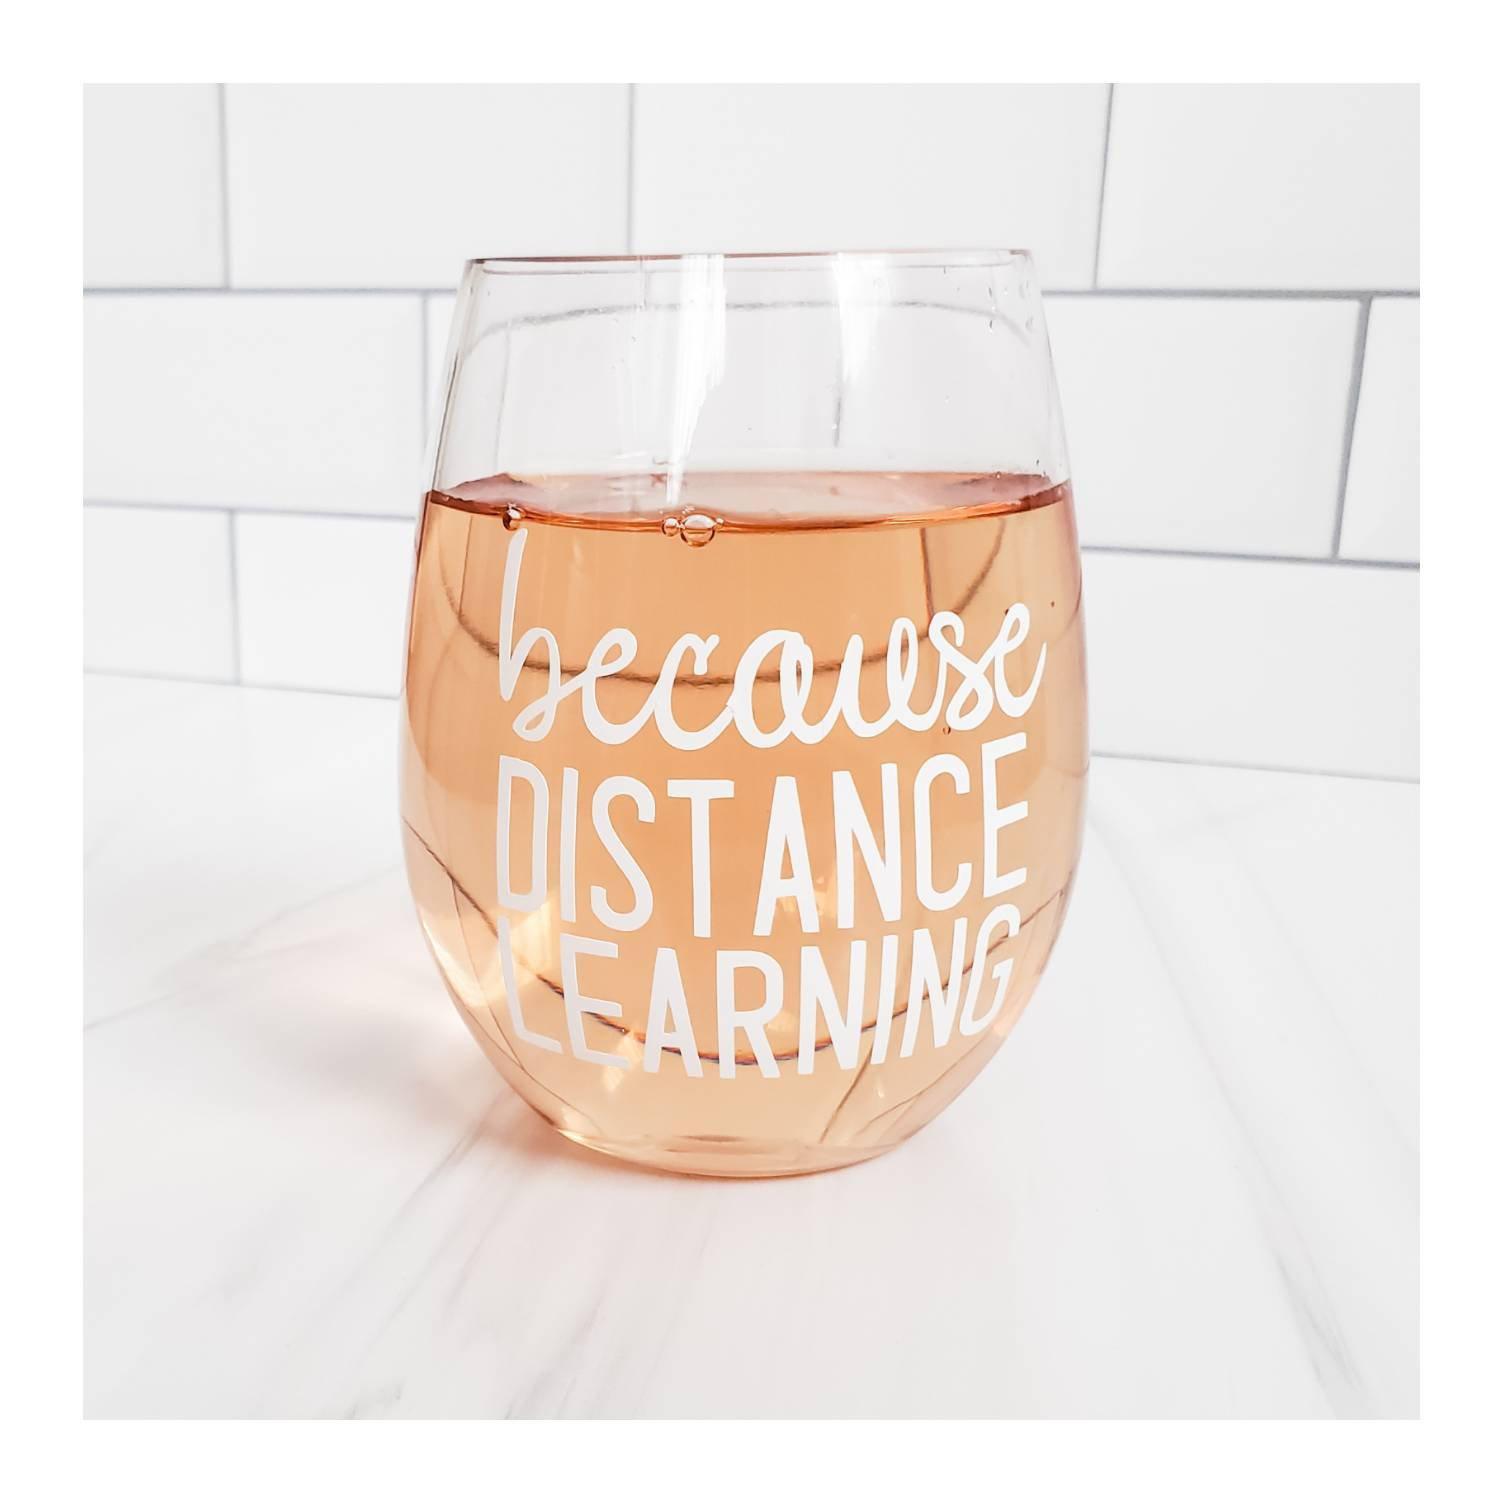 BECAUSE DISTANCE LEARNING Homeschool Acrylic Wine Glass Salt and Sparkle